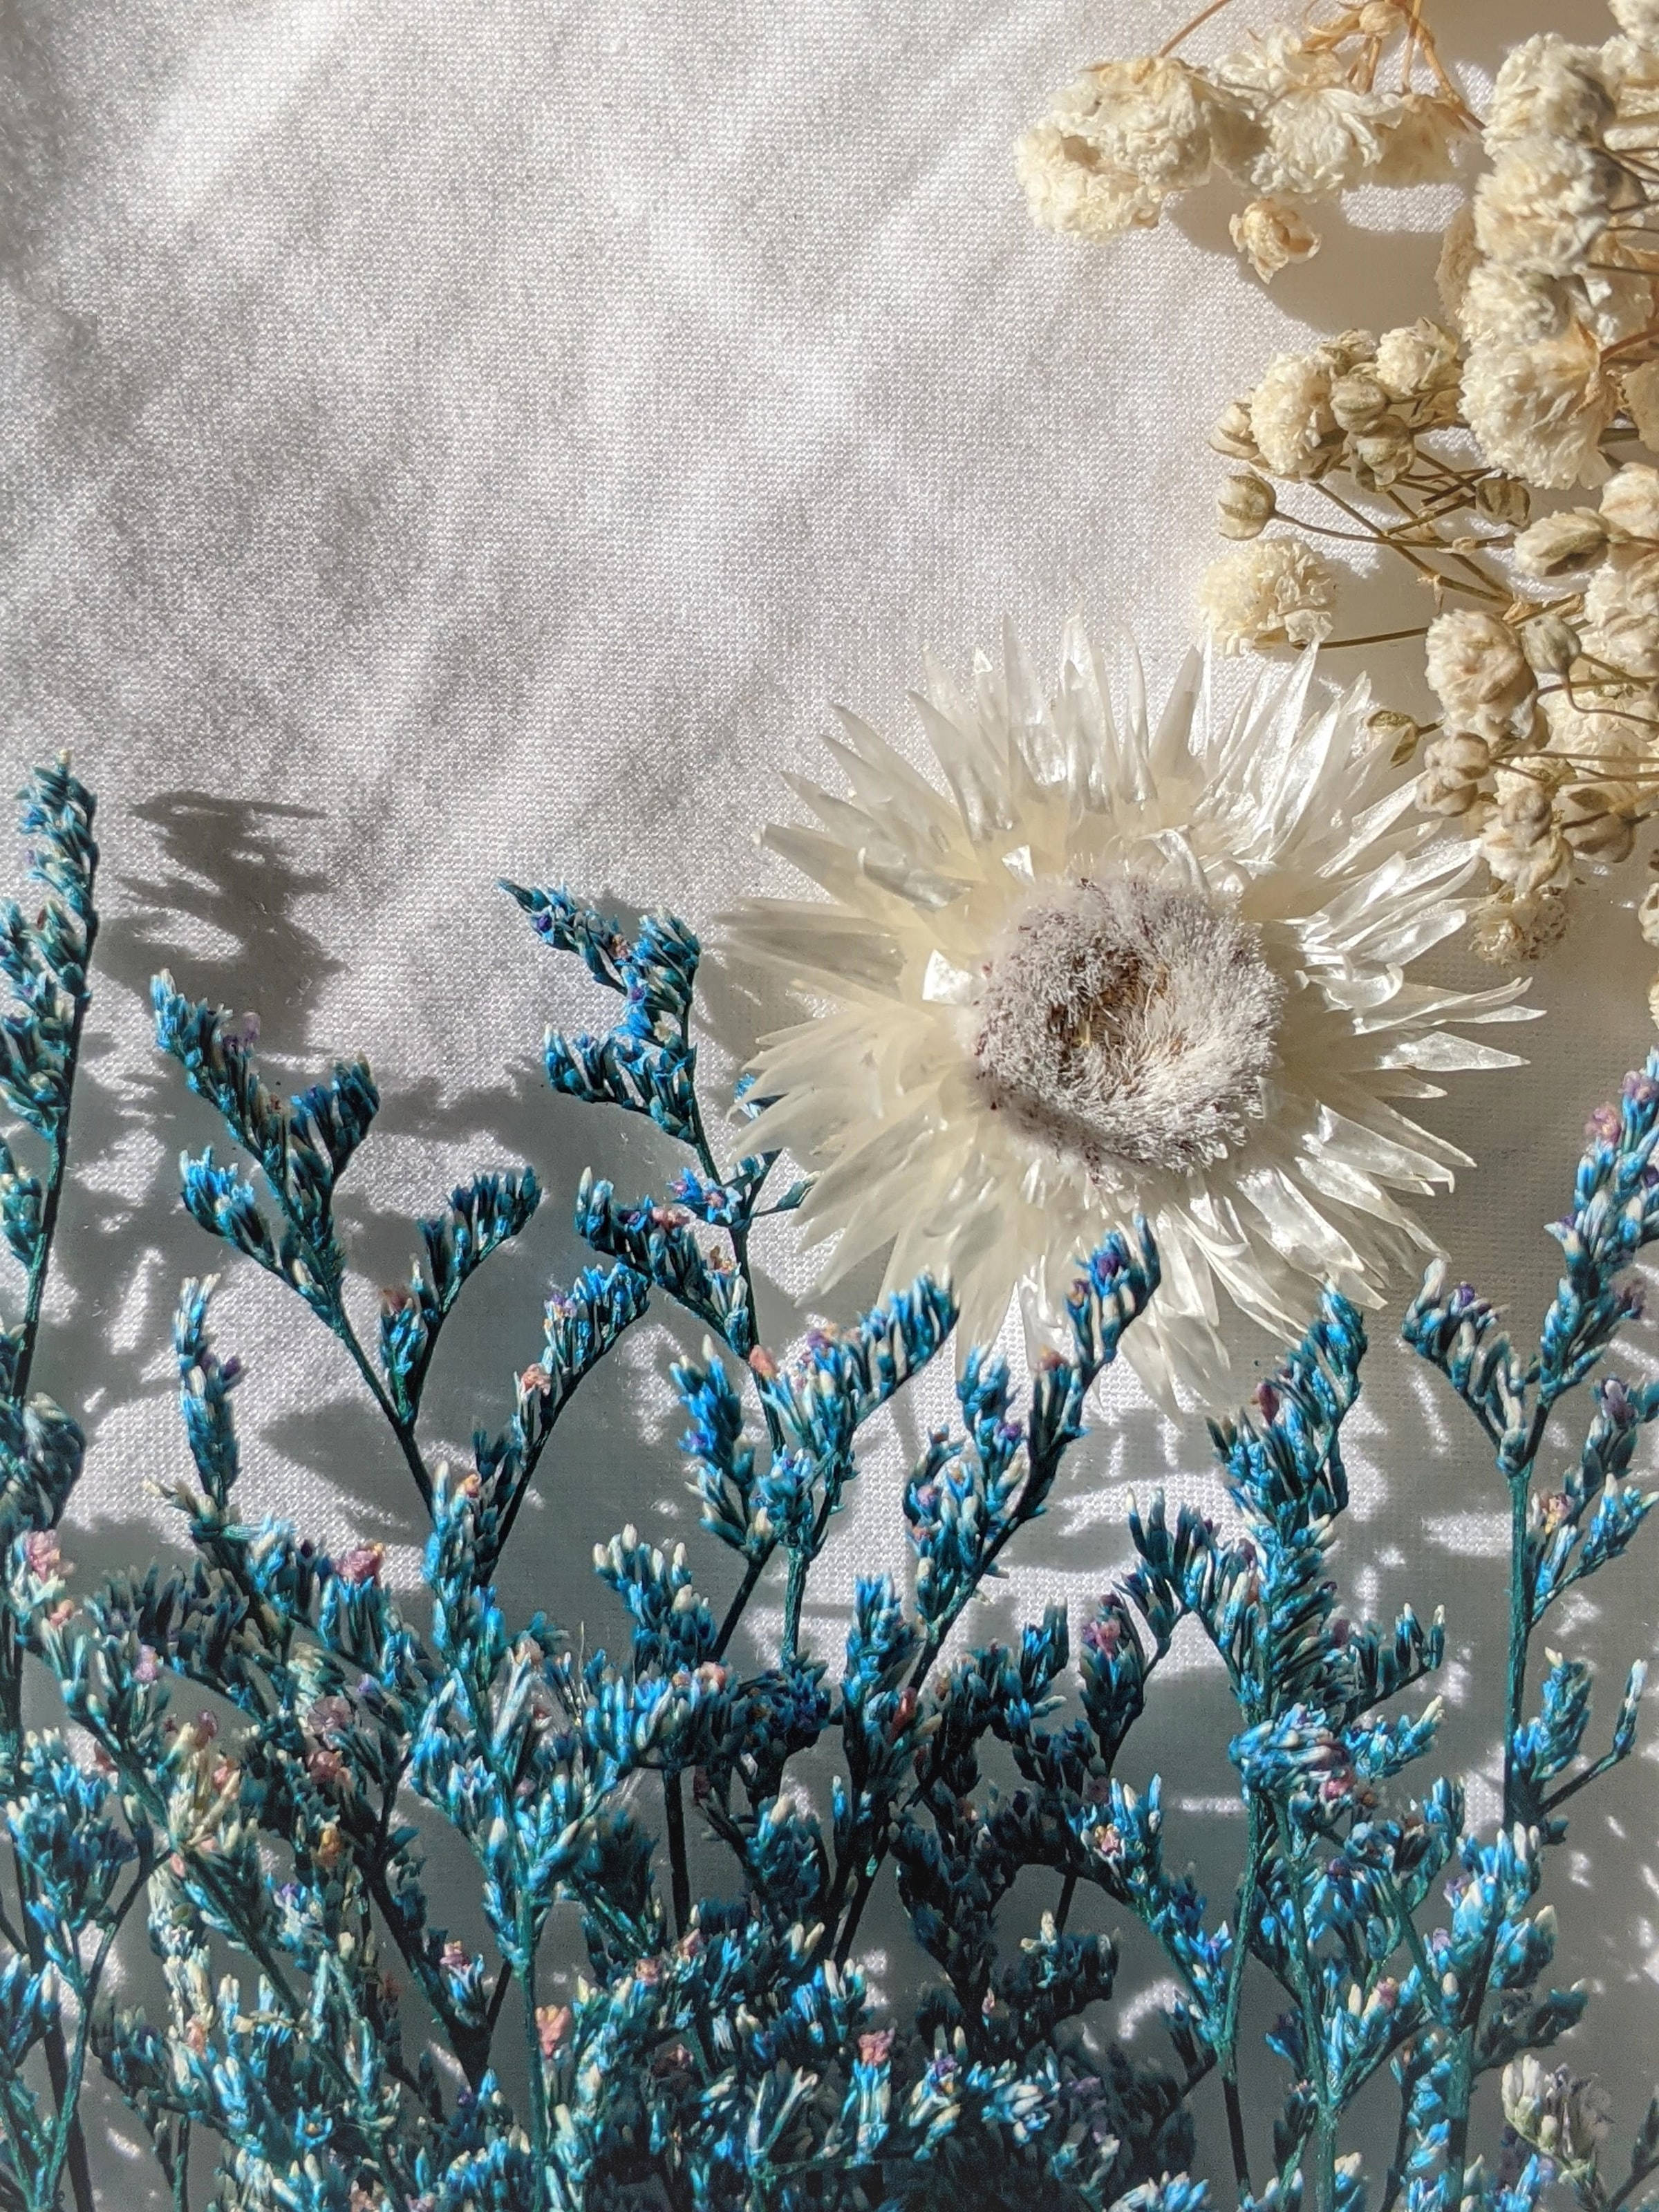 Cute Blue Aesthetic Dried Grass And Flowers Background